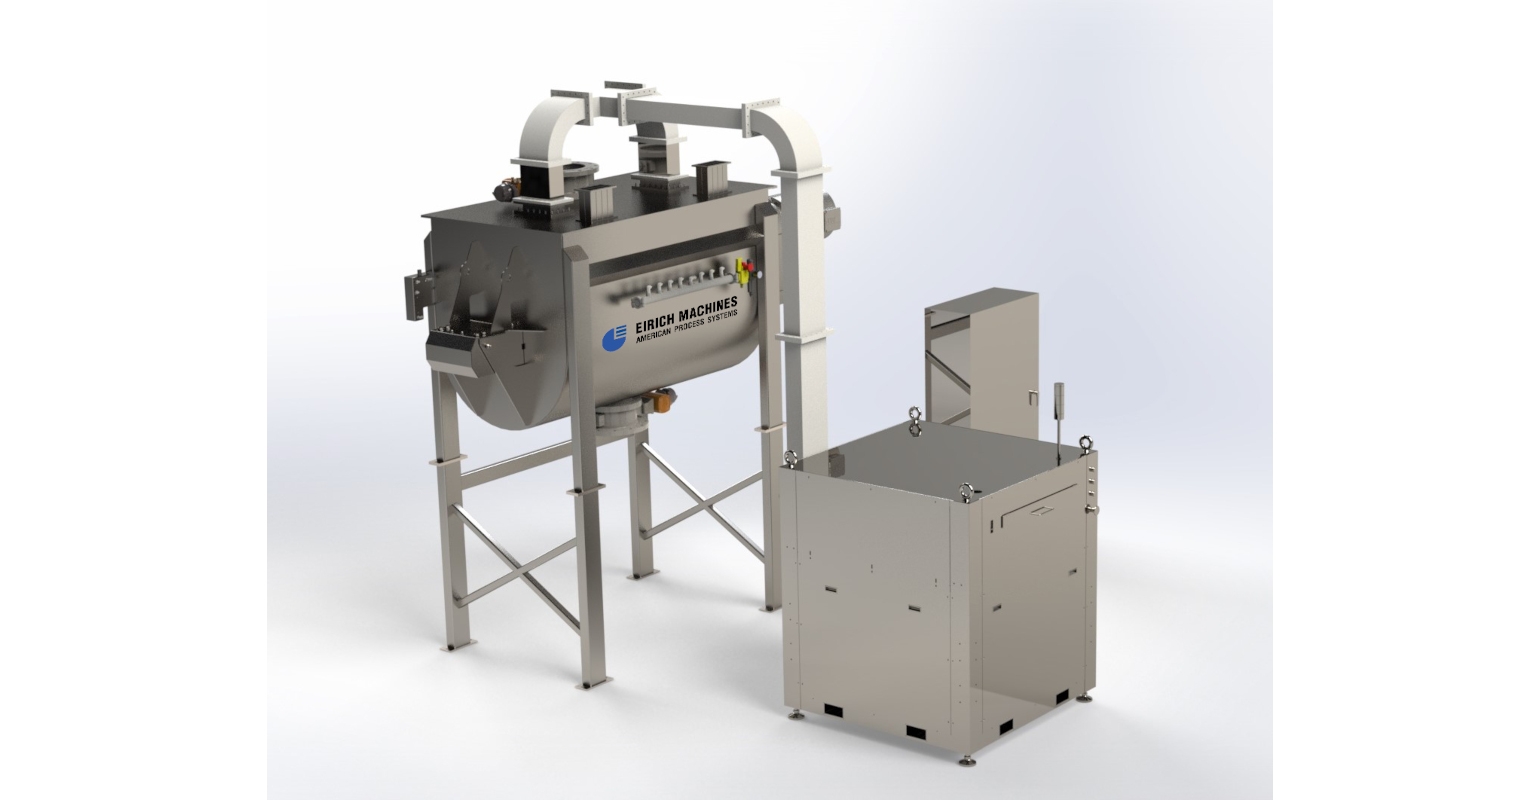 Seasonings and Spice Mixing Blenders - Eirich Machines - American Process  Systems